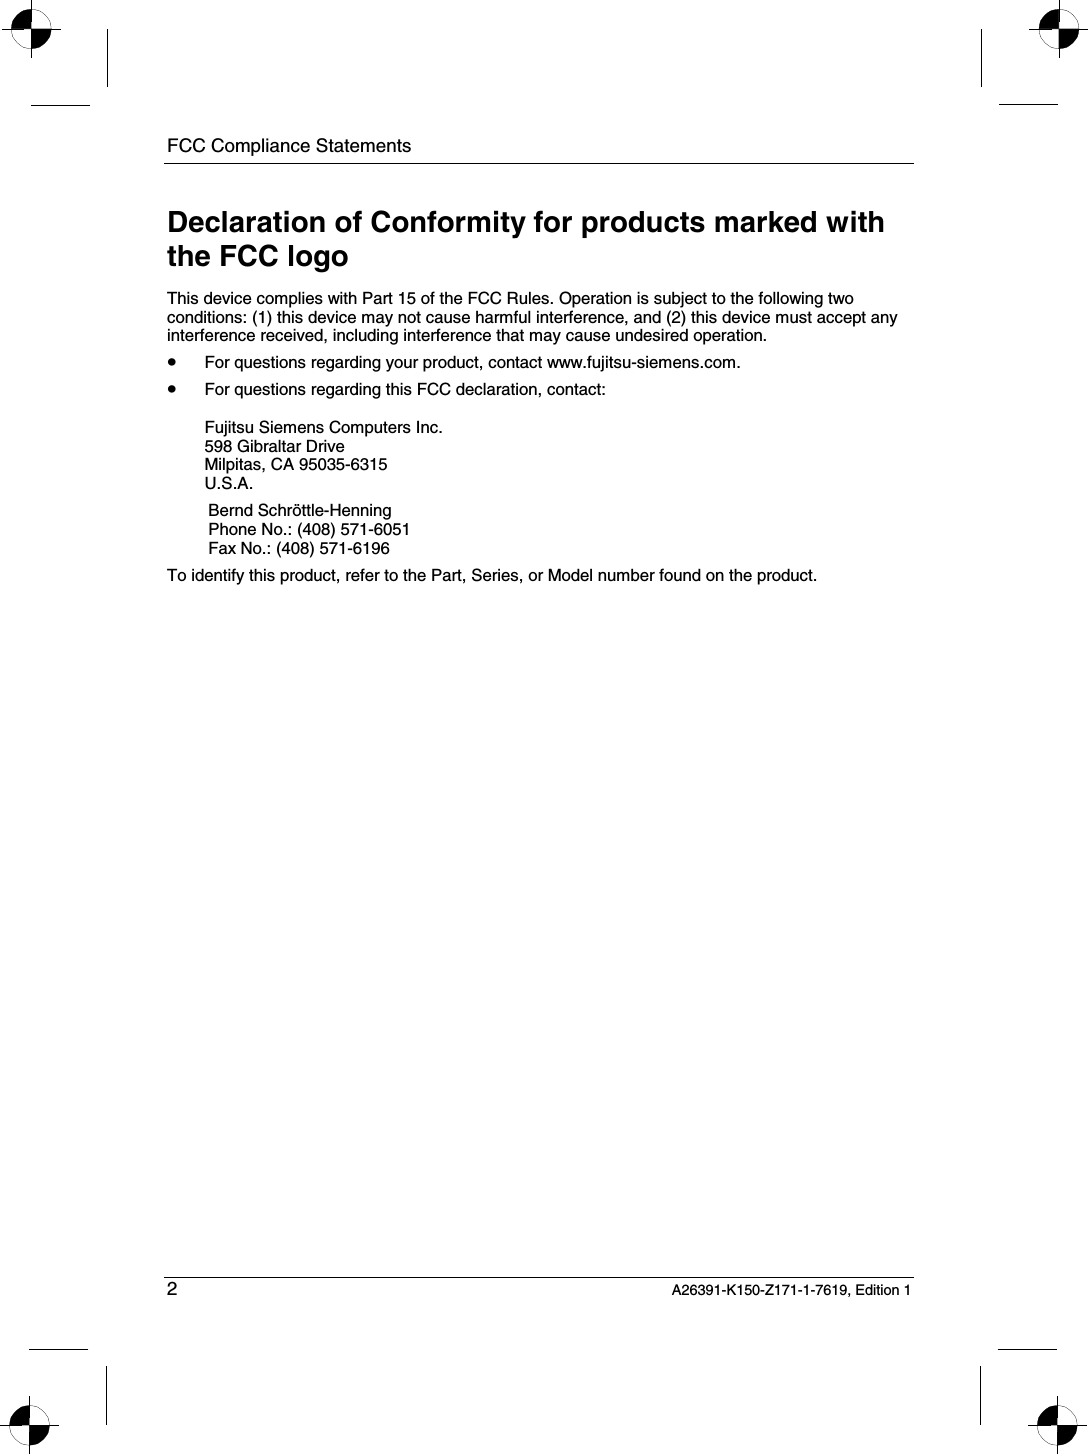 FCC Compliance Statements   2 A26391-K150-Z171-1-7619, Edition 1 Declaration of Conformity for products marked with the FCC logo This device complies with Part 15 of the FCC Rules. Operation is subject to the following two conditions: (1) this device may not cause harmful interference, and (2) this device must accept any interference received, including interference that may cause undesired operation. • For questions regarding your product, contact www.fujitsu-siemens.com. • For questions regarding this FCC declaration, contact:  Fujitsu Siemens Computers Inc. 598 Gibraltar Drive Milpitas, CA 95035-6315 U.S.A. Bernd Schröttle-Henning Phone No.: (408) 571-6051 Fax No.: (408) 571-6196 To identify this product, refer to the Part, Series, or Model number found on the product. 